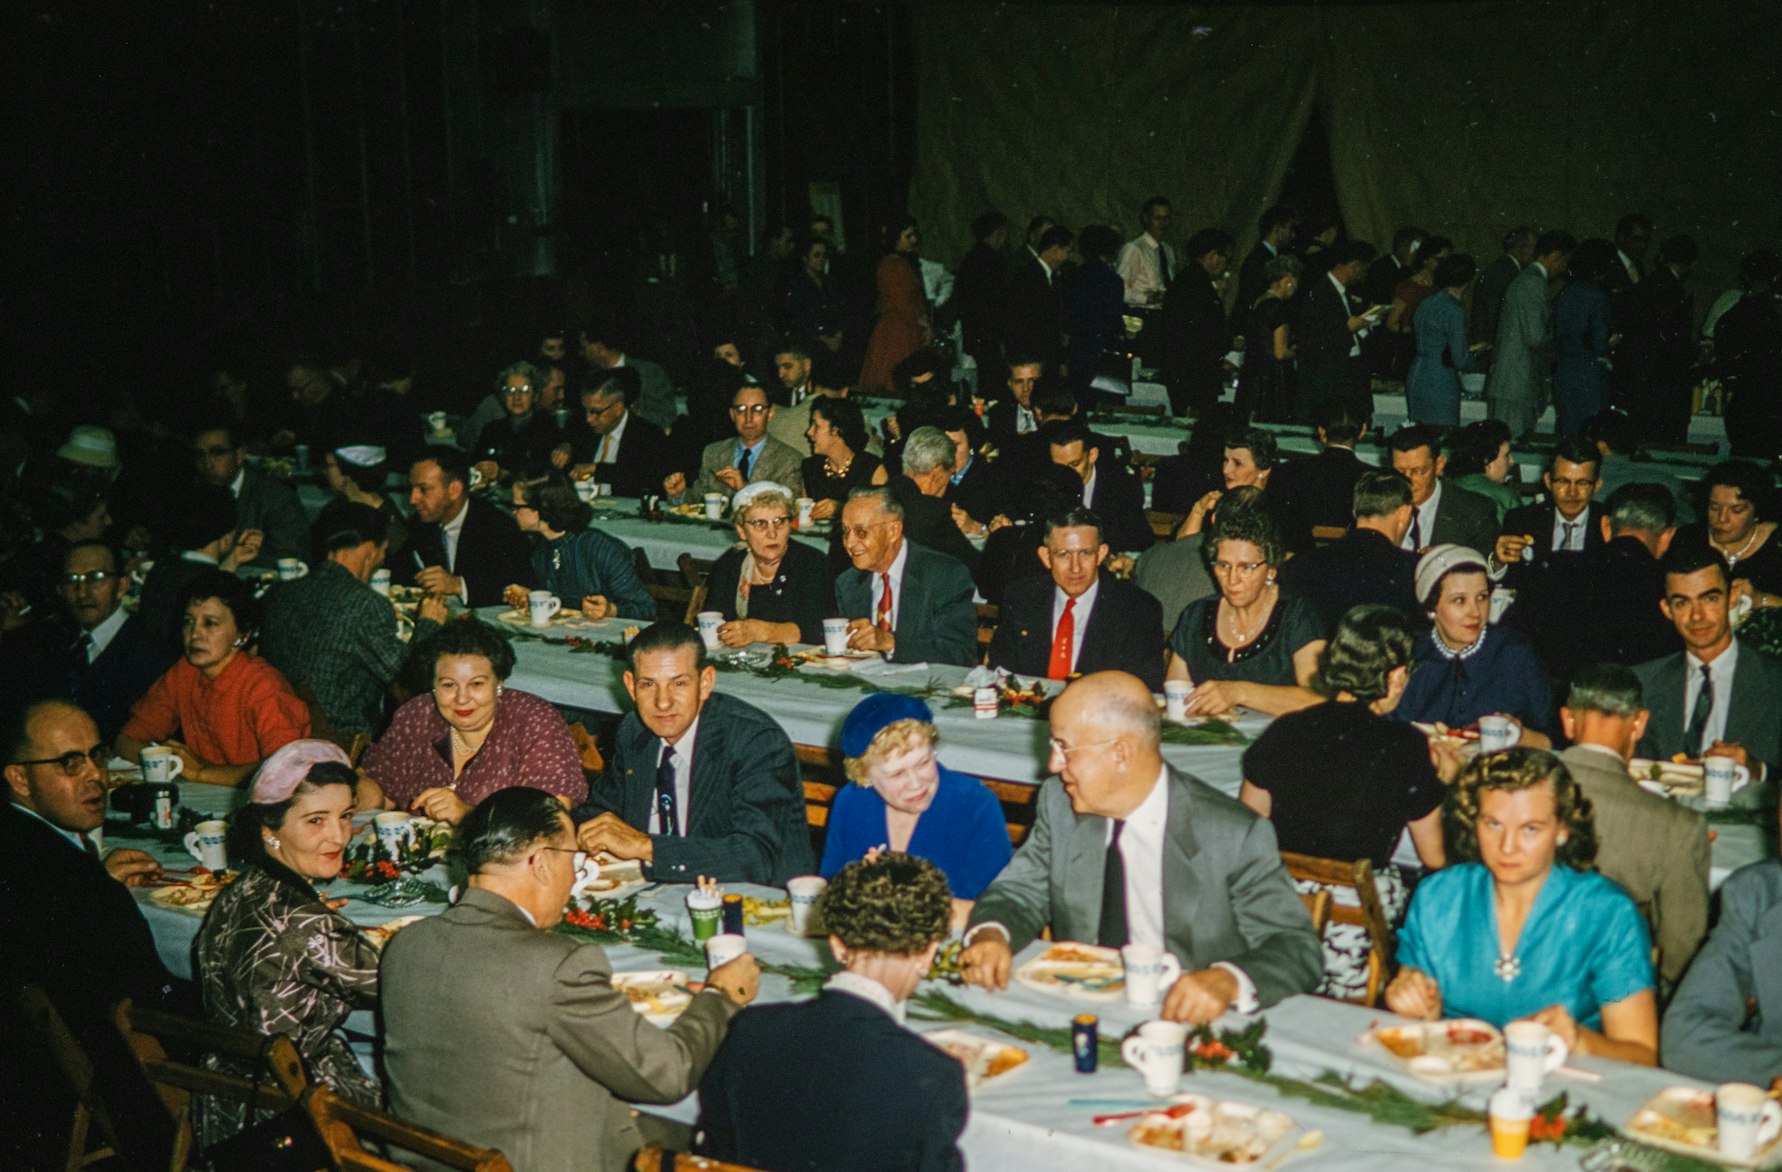 Vintage photo of people dressed up and eating at long tables